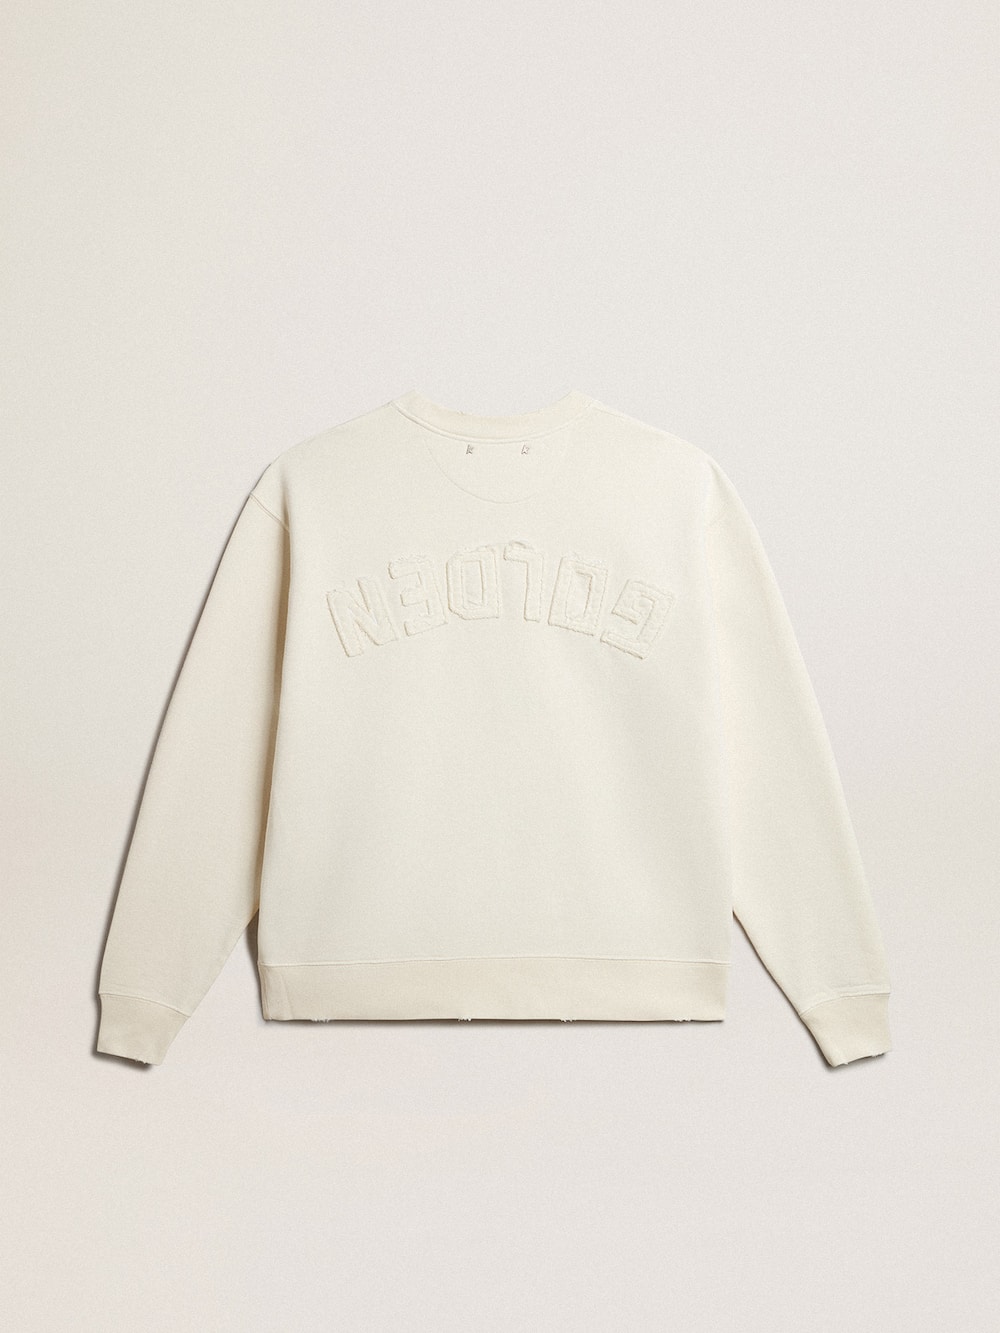 Golden Goose - Sweatshirt in aged white with reverse logo on the back - Asian fit in 